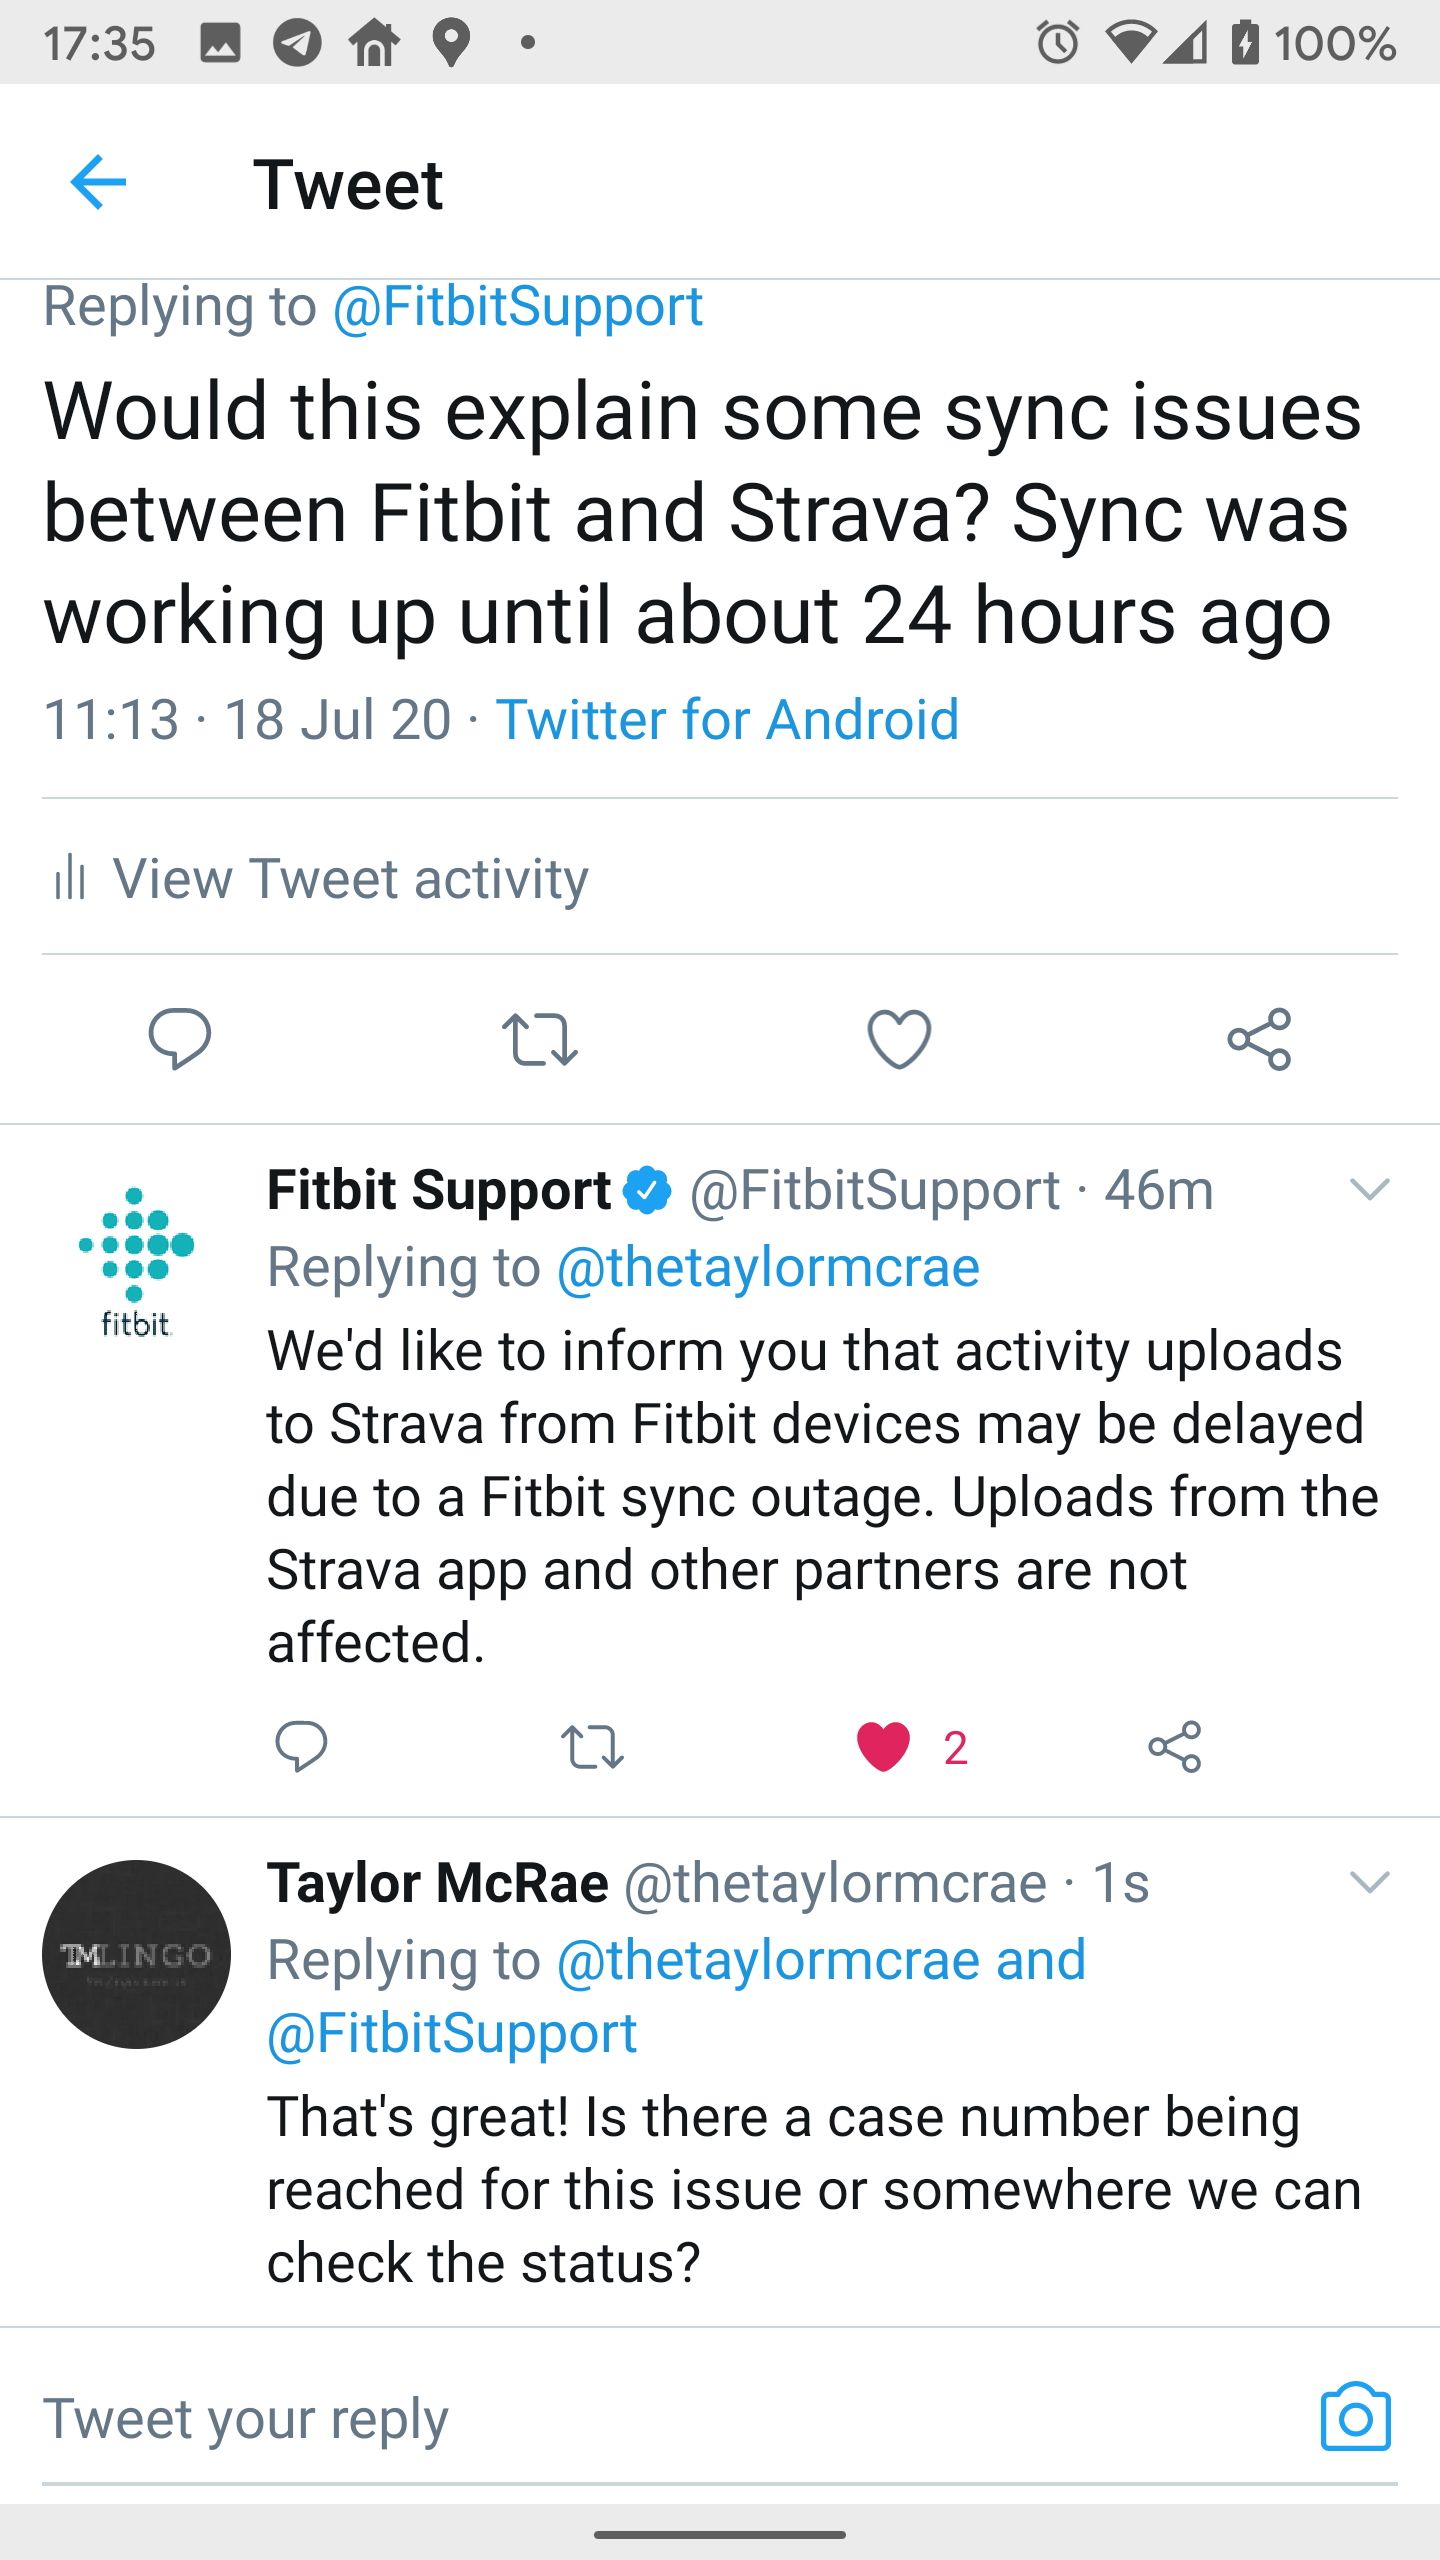 Unable to sync Fitbit data to Strava 